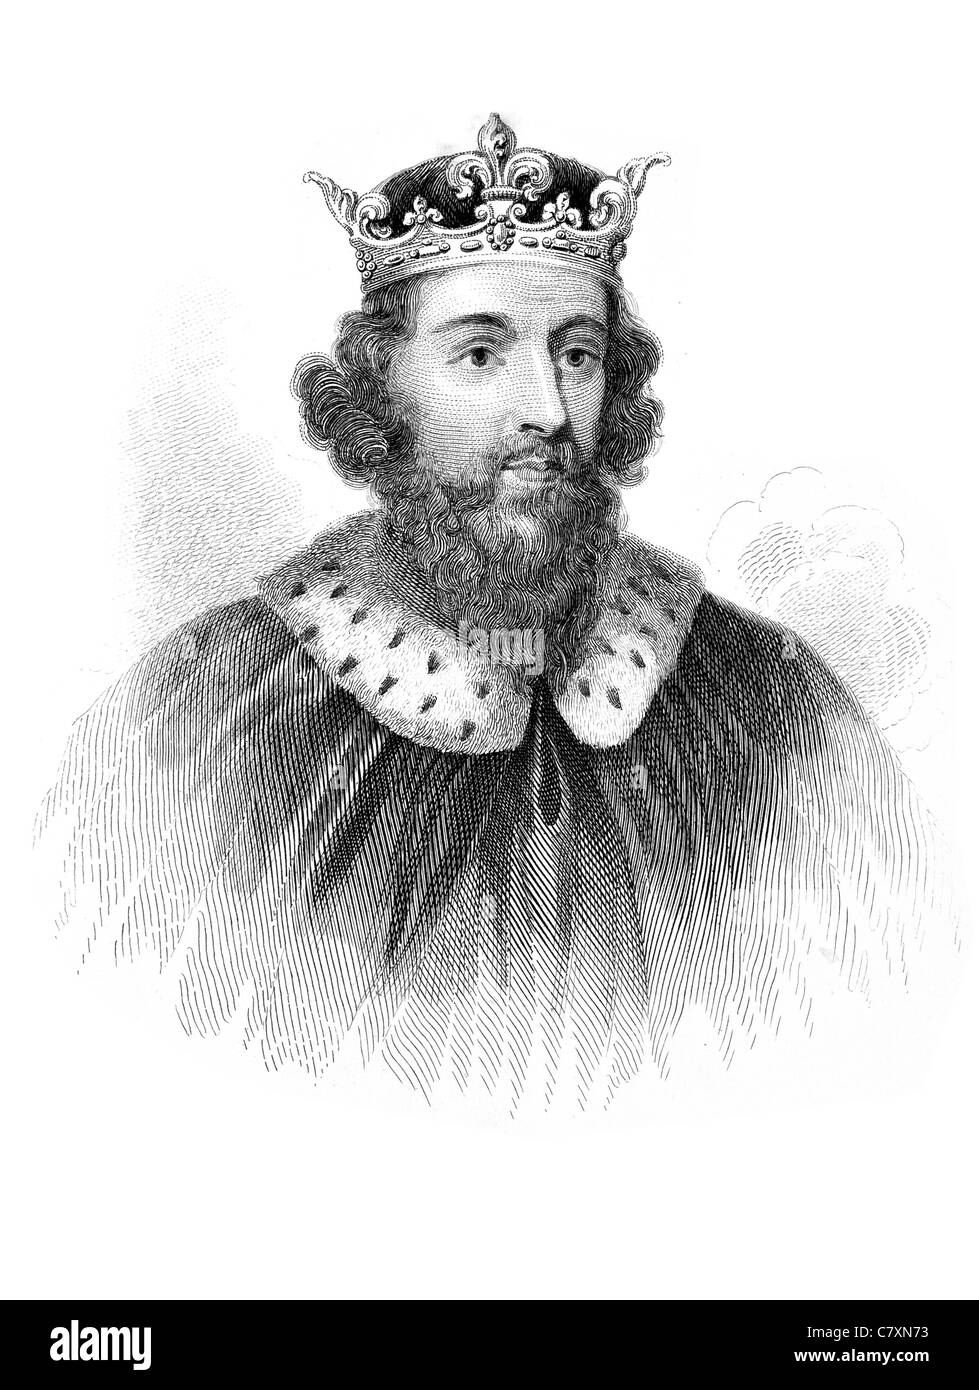 Alfred le Grand Roi Wessex 871899 royaume anglo-saxon Vikings monarque anglais king royal royal royal princière queenly Banque D'Images